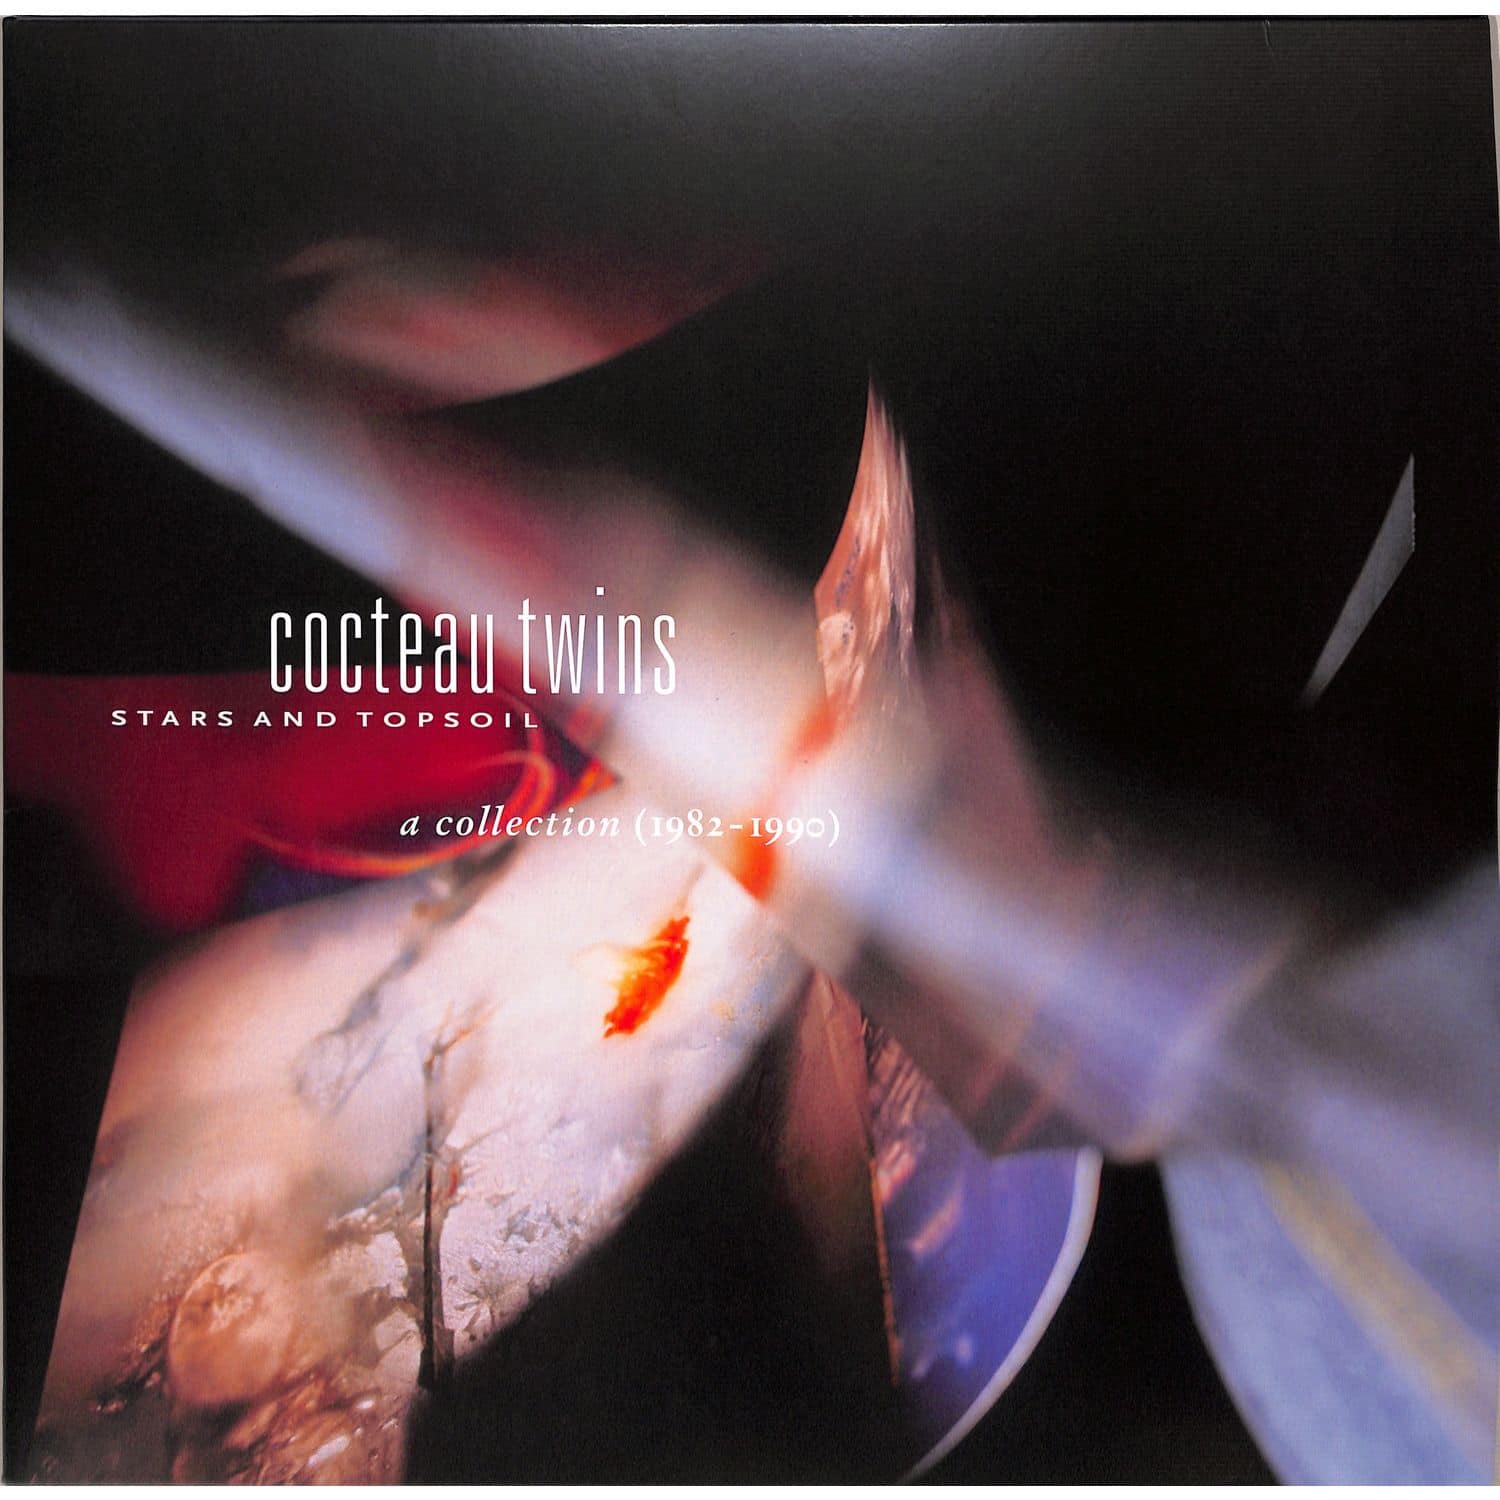 Cocteau Twins - STARS AND TOPSOIL - A COLLECTION 